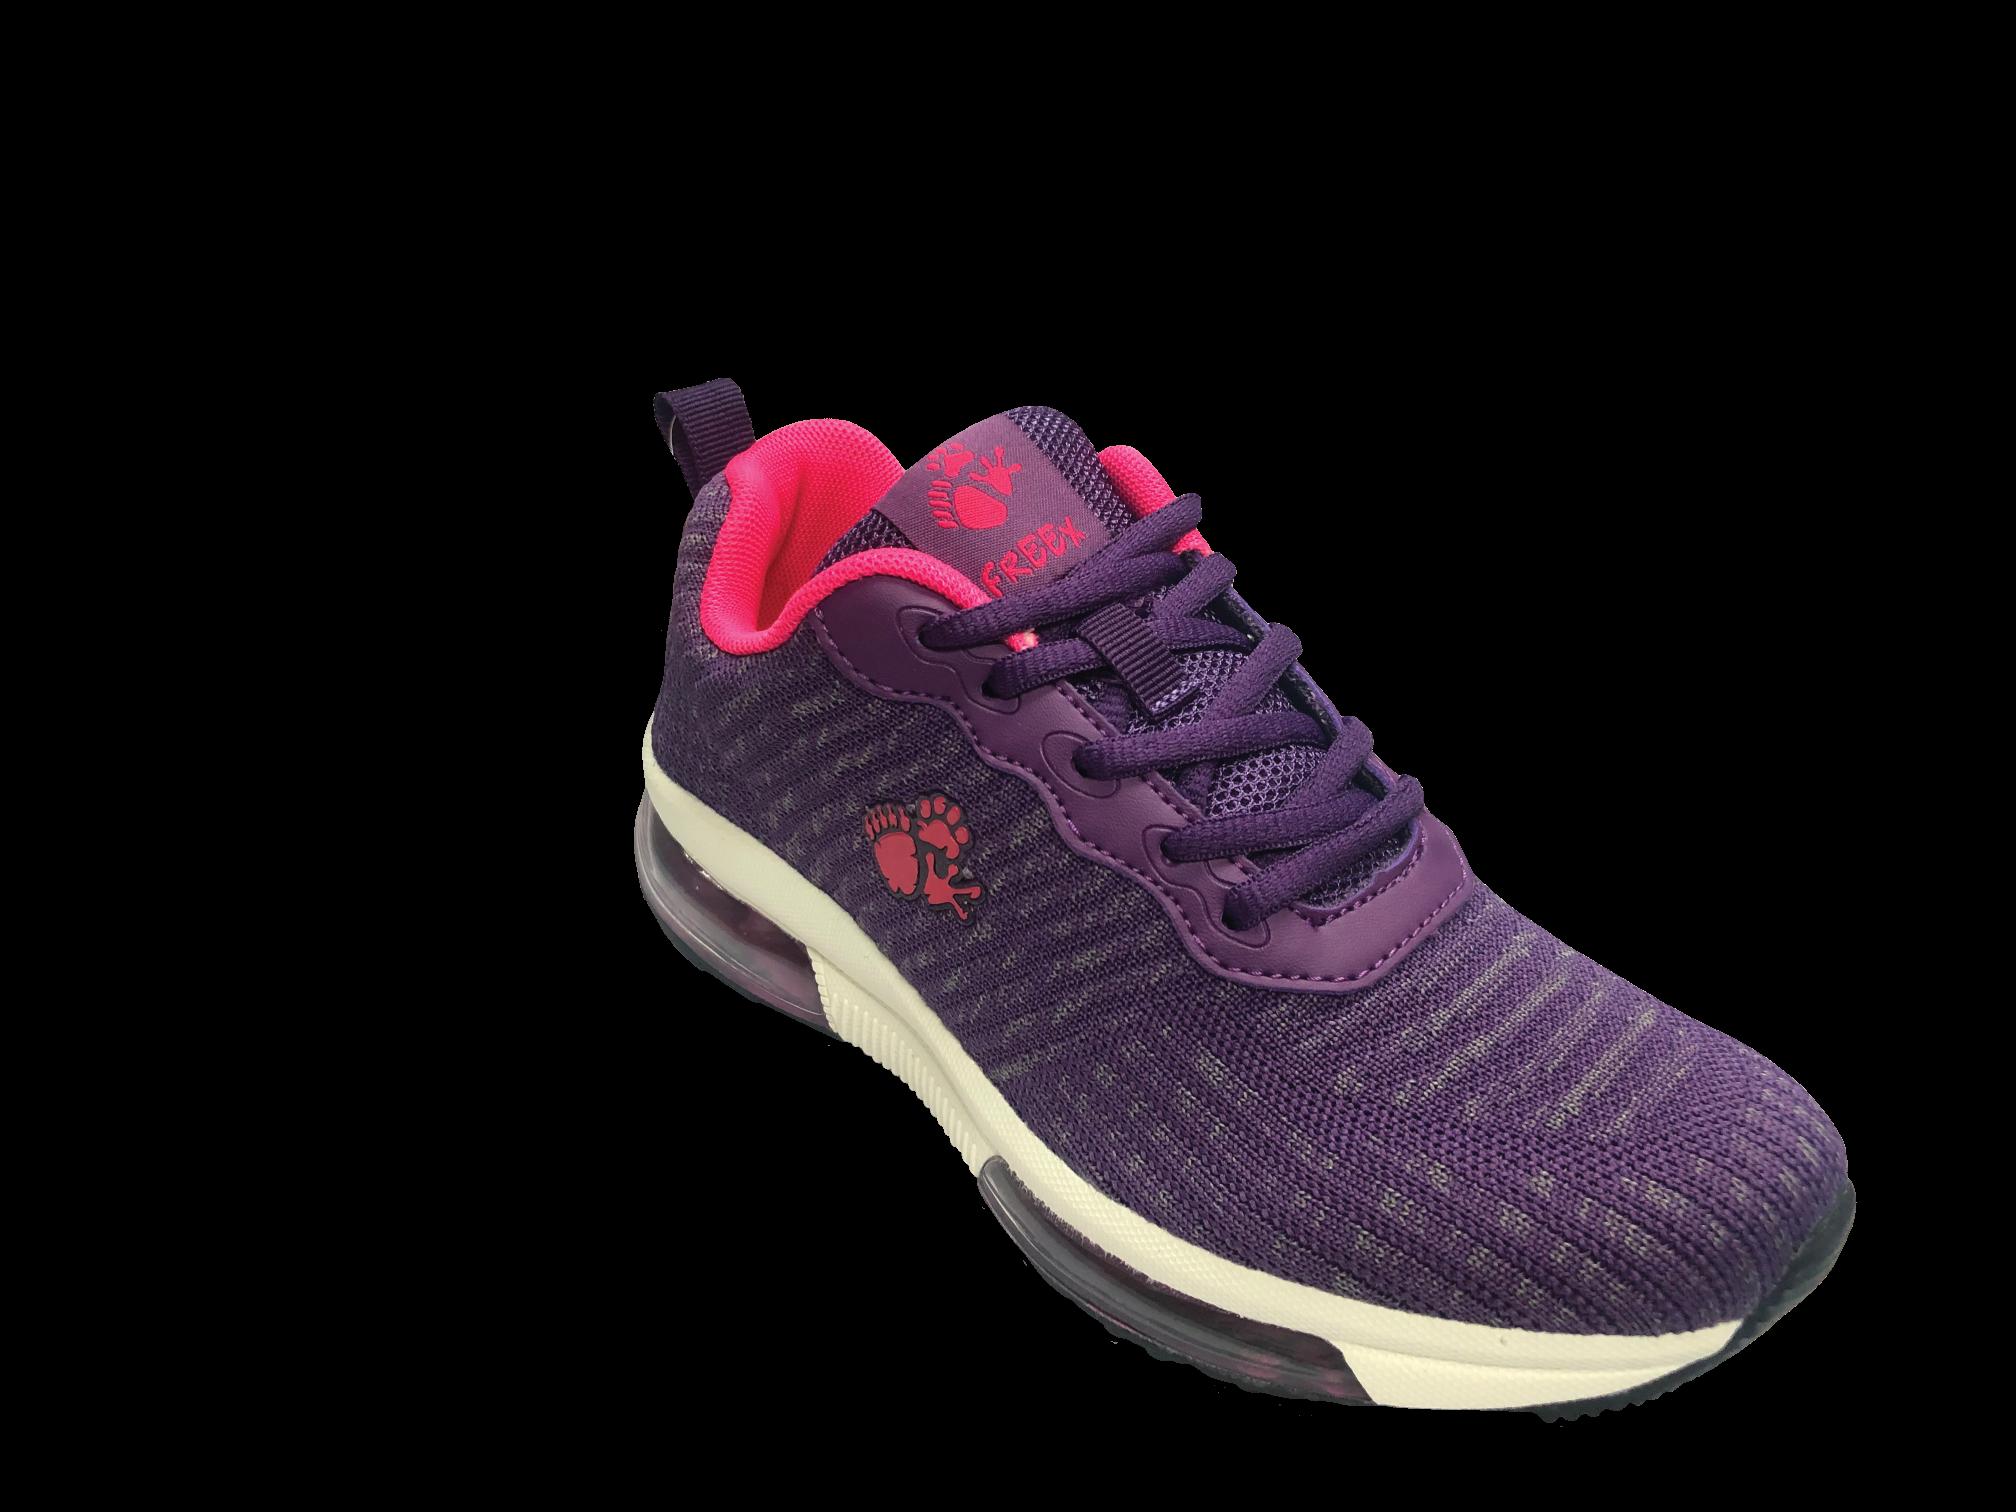 Women's Front and Heel Air Cushion 